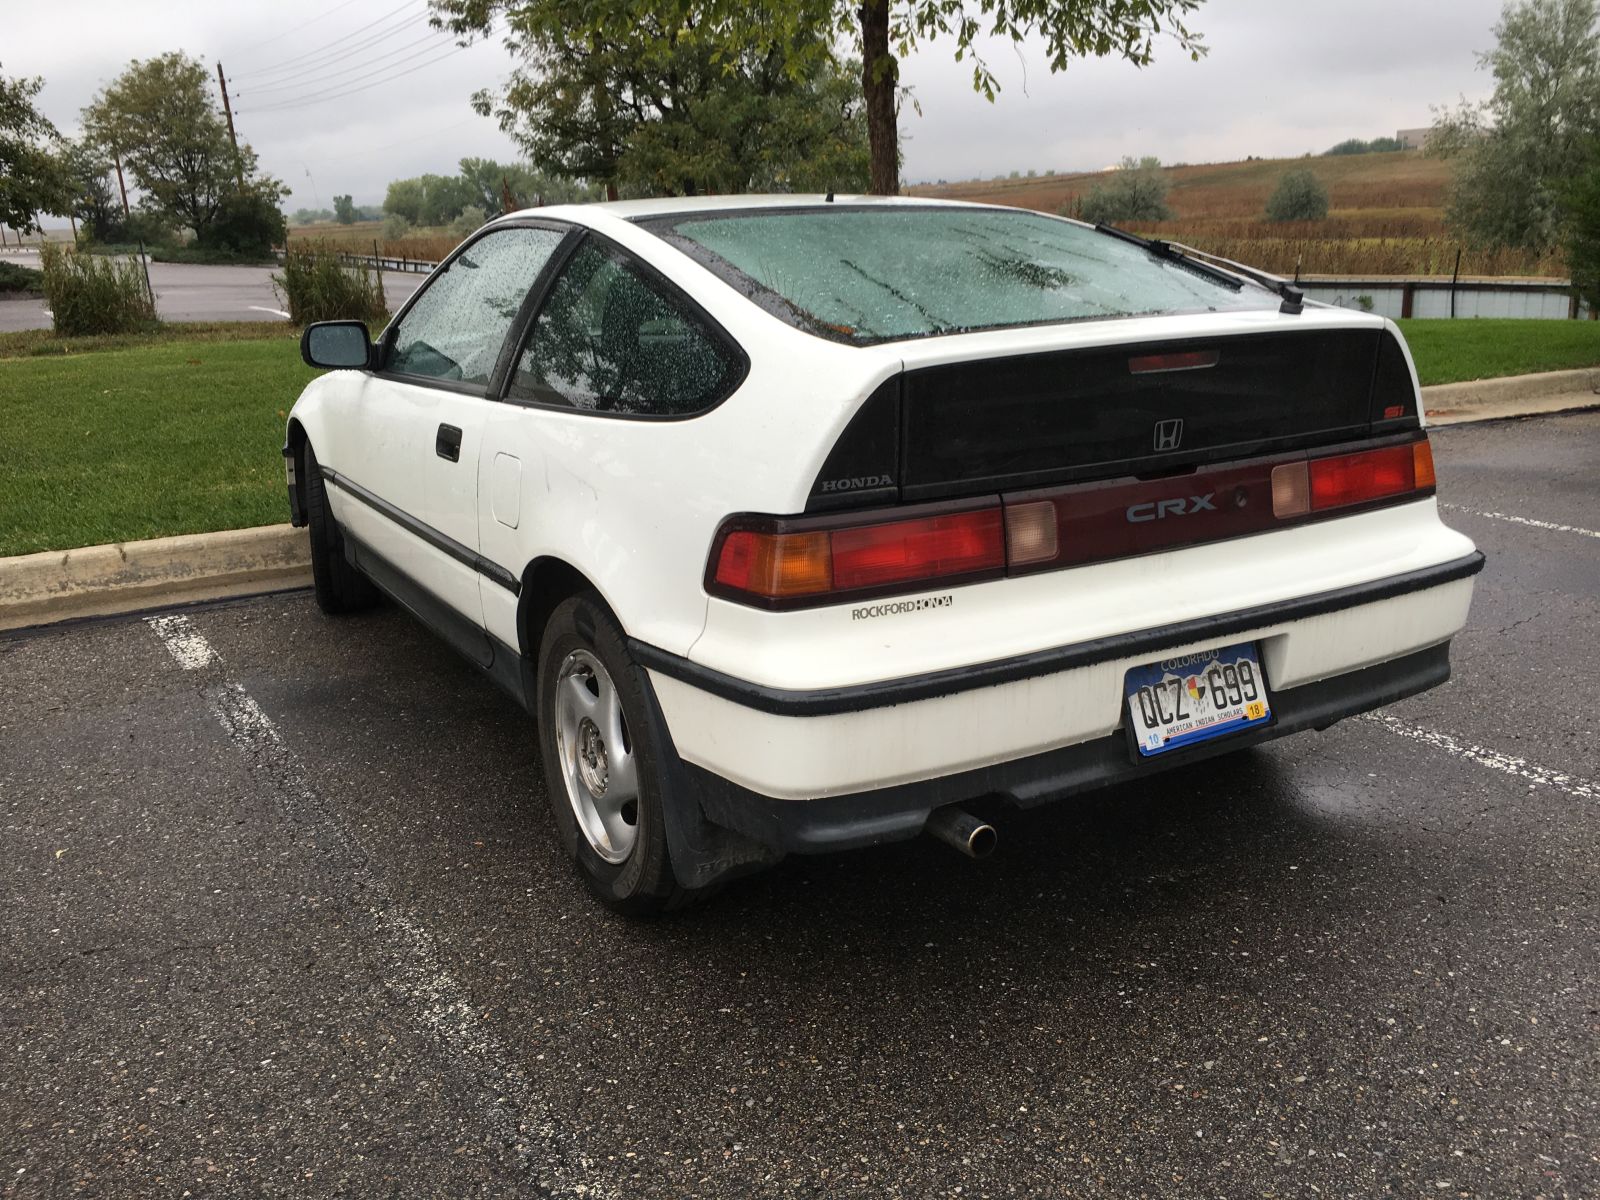 And now to cleanse your palate, this minty-fresh Honda CRX Si that showed up in my office parking lot this week.